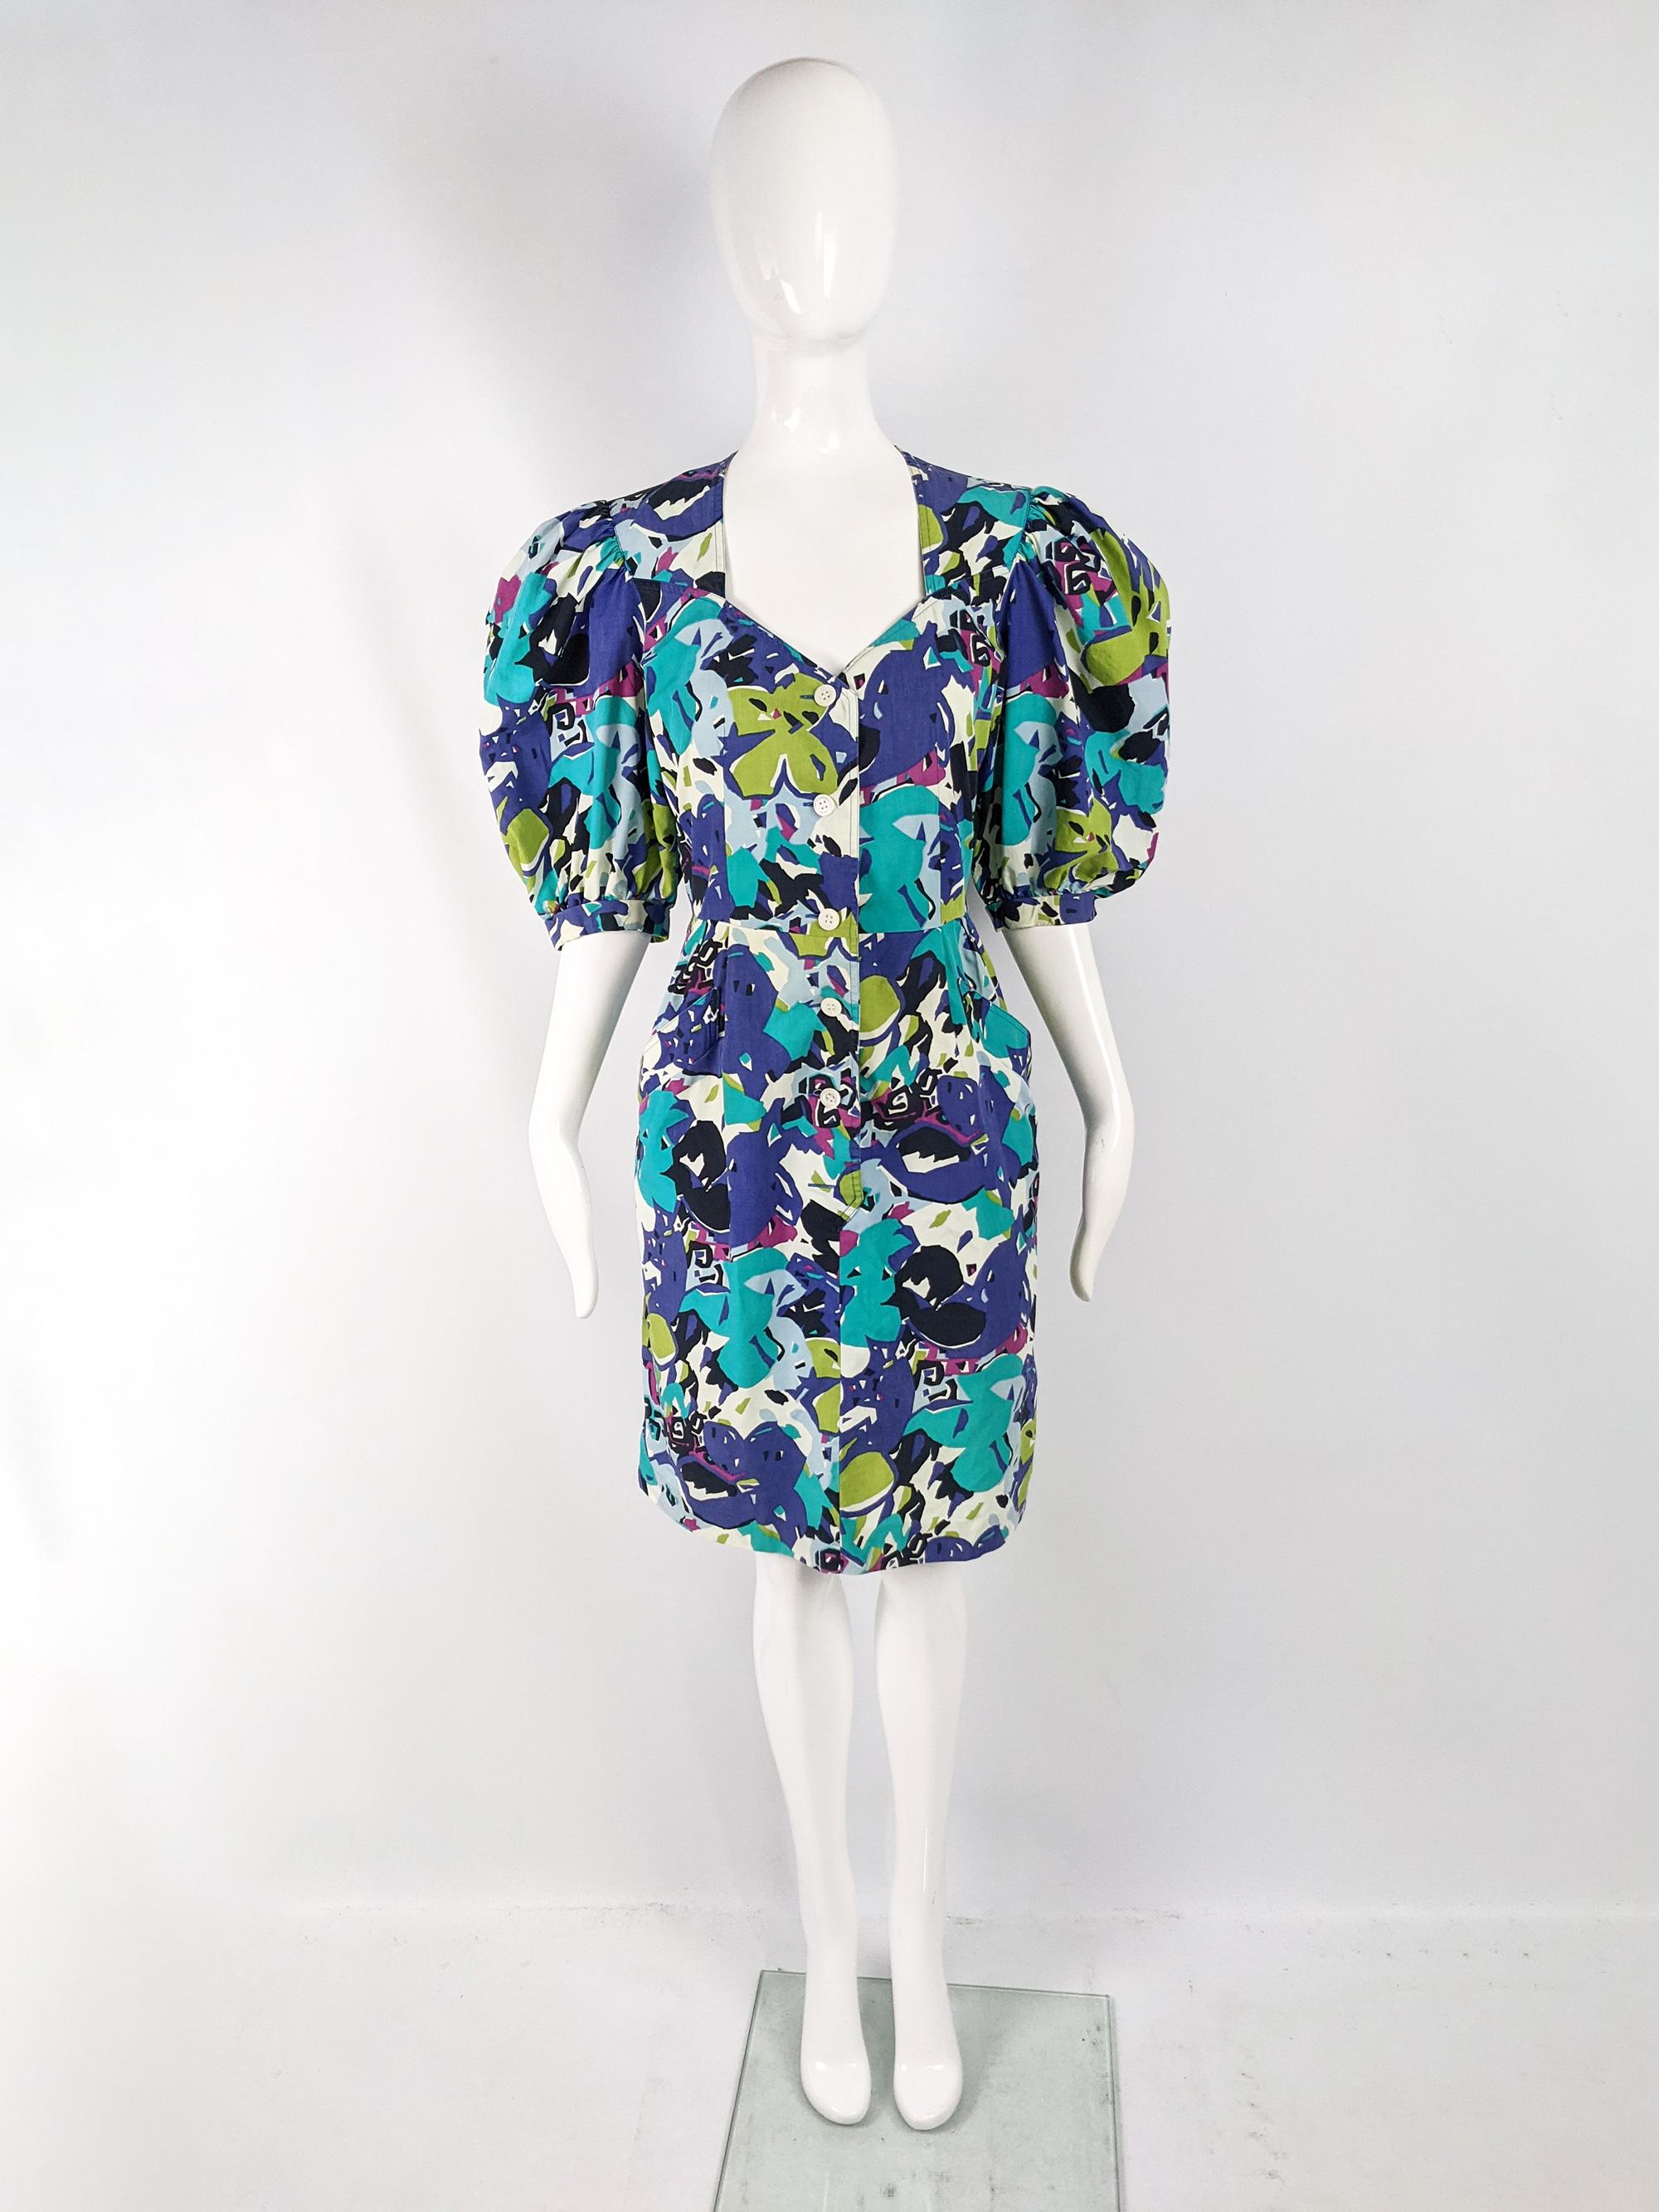 A fabulous vintage dress from the 80s by luxury French fashion designer, Guy Laroche. In a vibrantly multicoloured cotton fabric with short, puffed sleeves and a nipped waist. Perfect for a bold look in the day in spring and summer or dressed up at